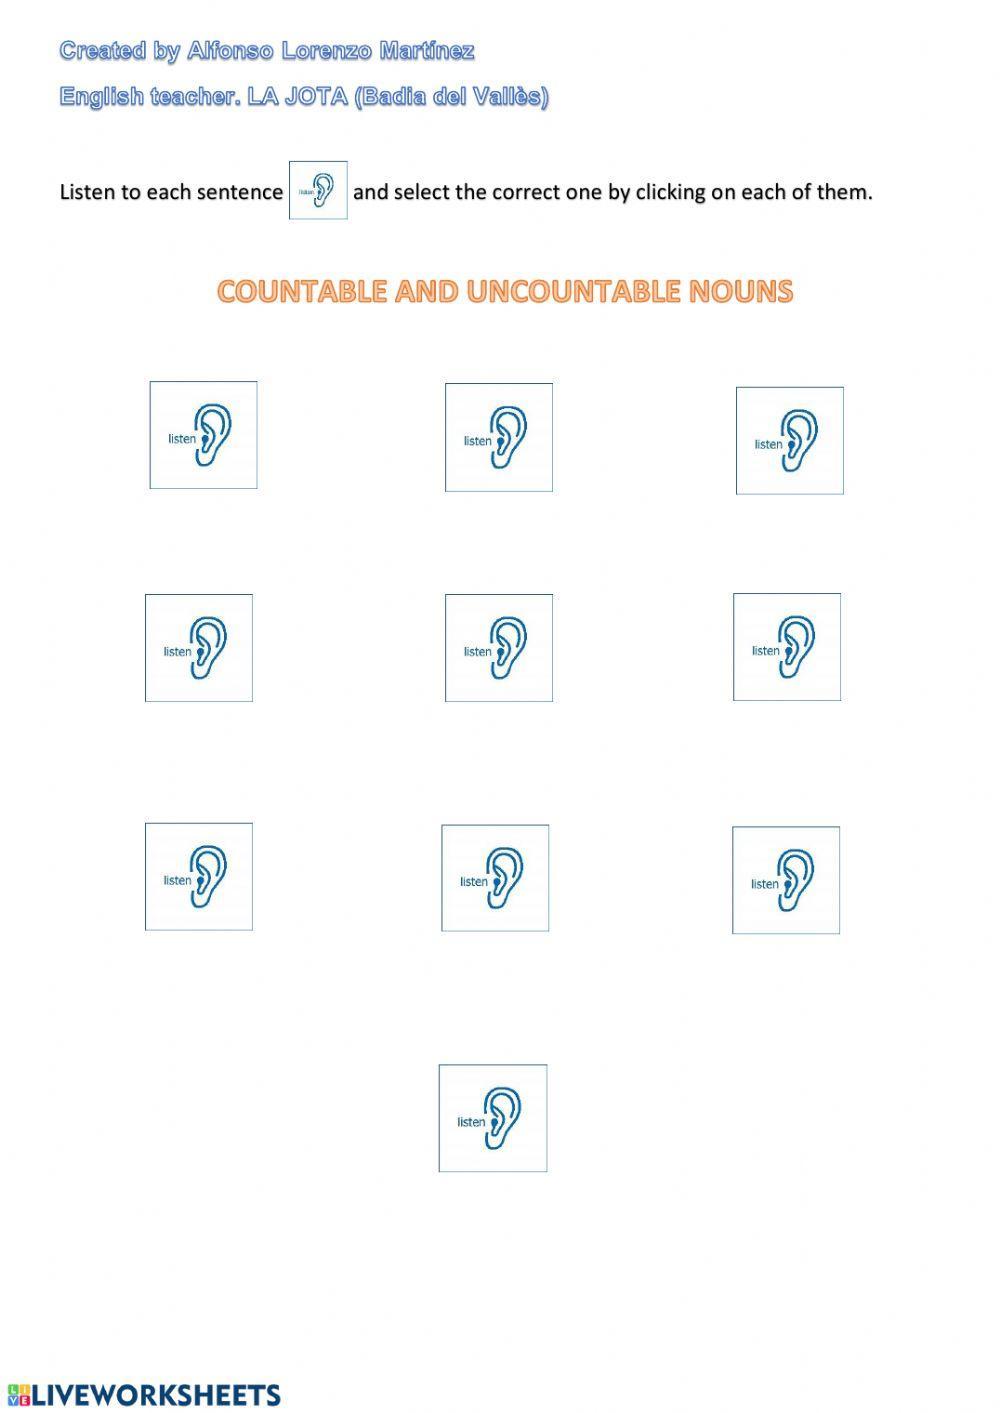 Listening: Countable and uncountable nouns